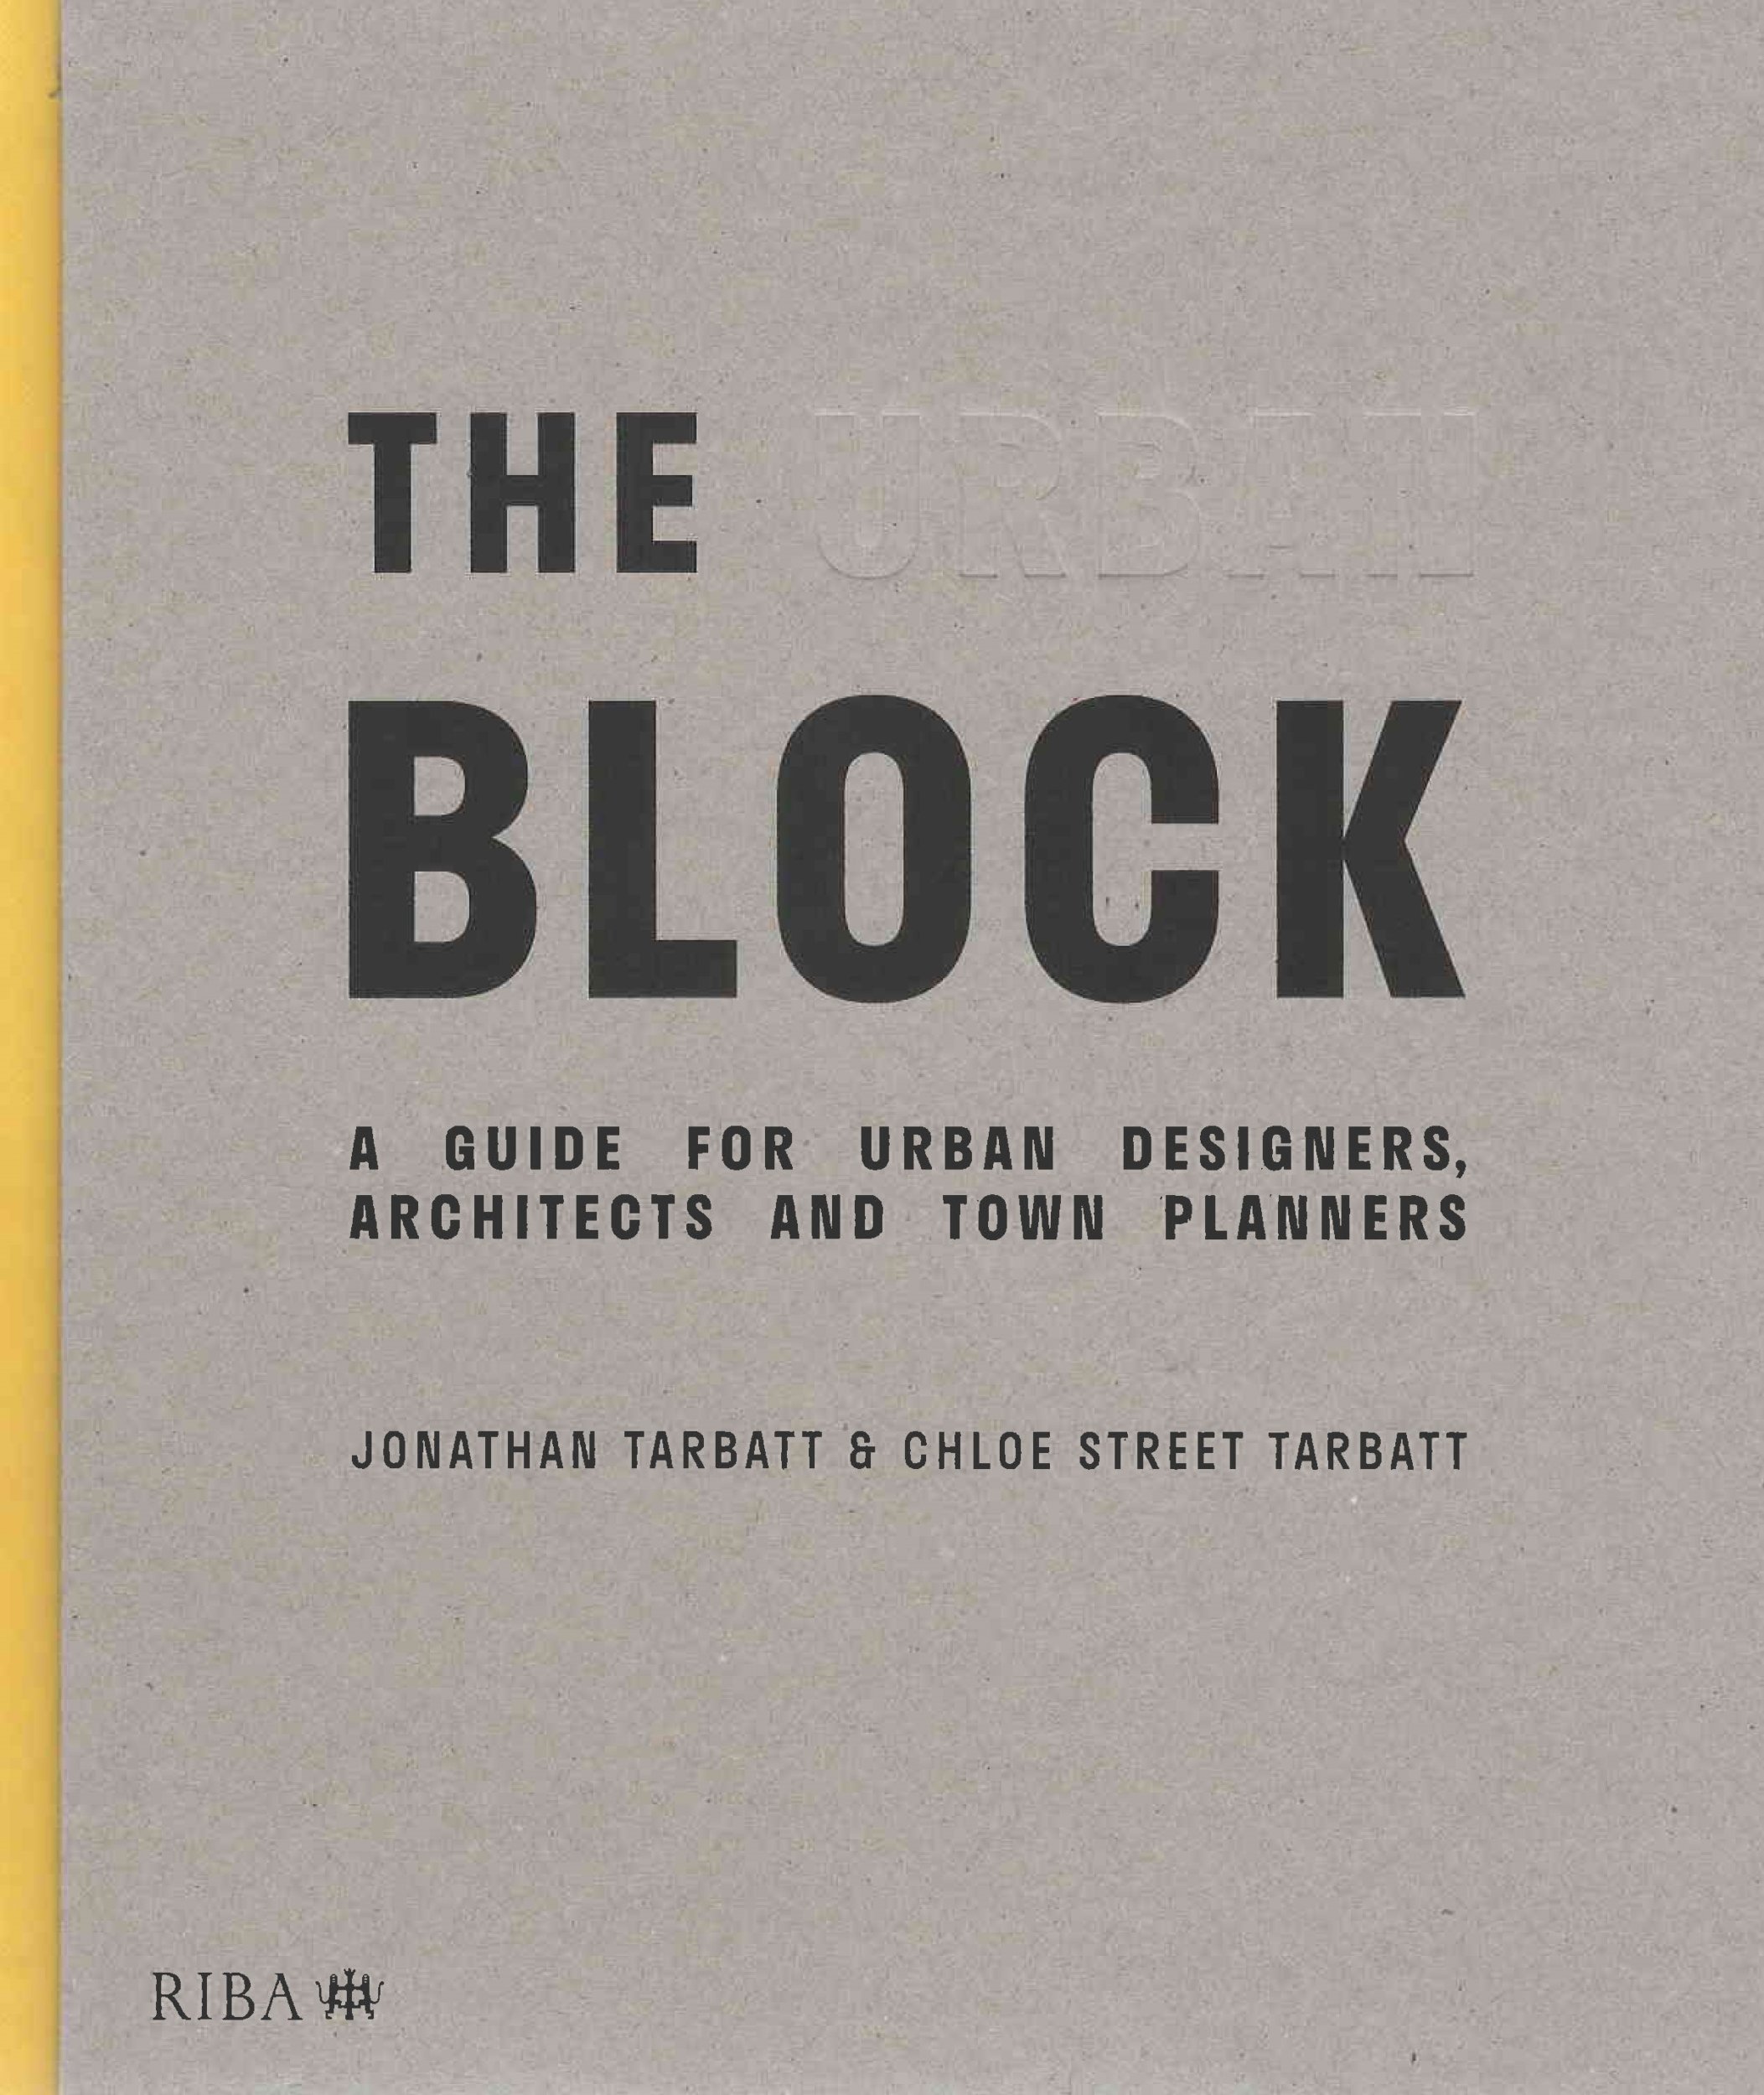 The urban block : a guide for urban designers, architects and town planners